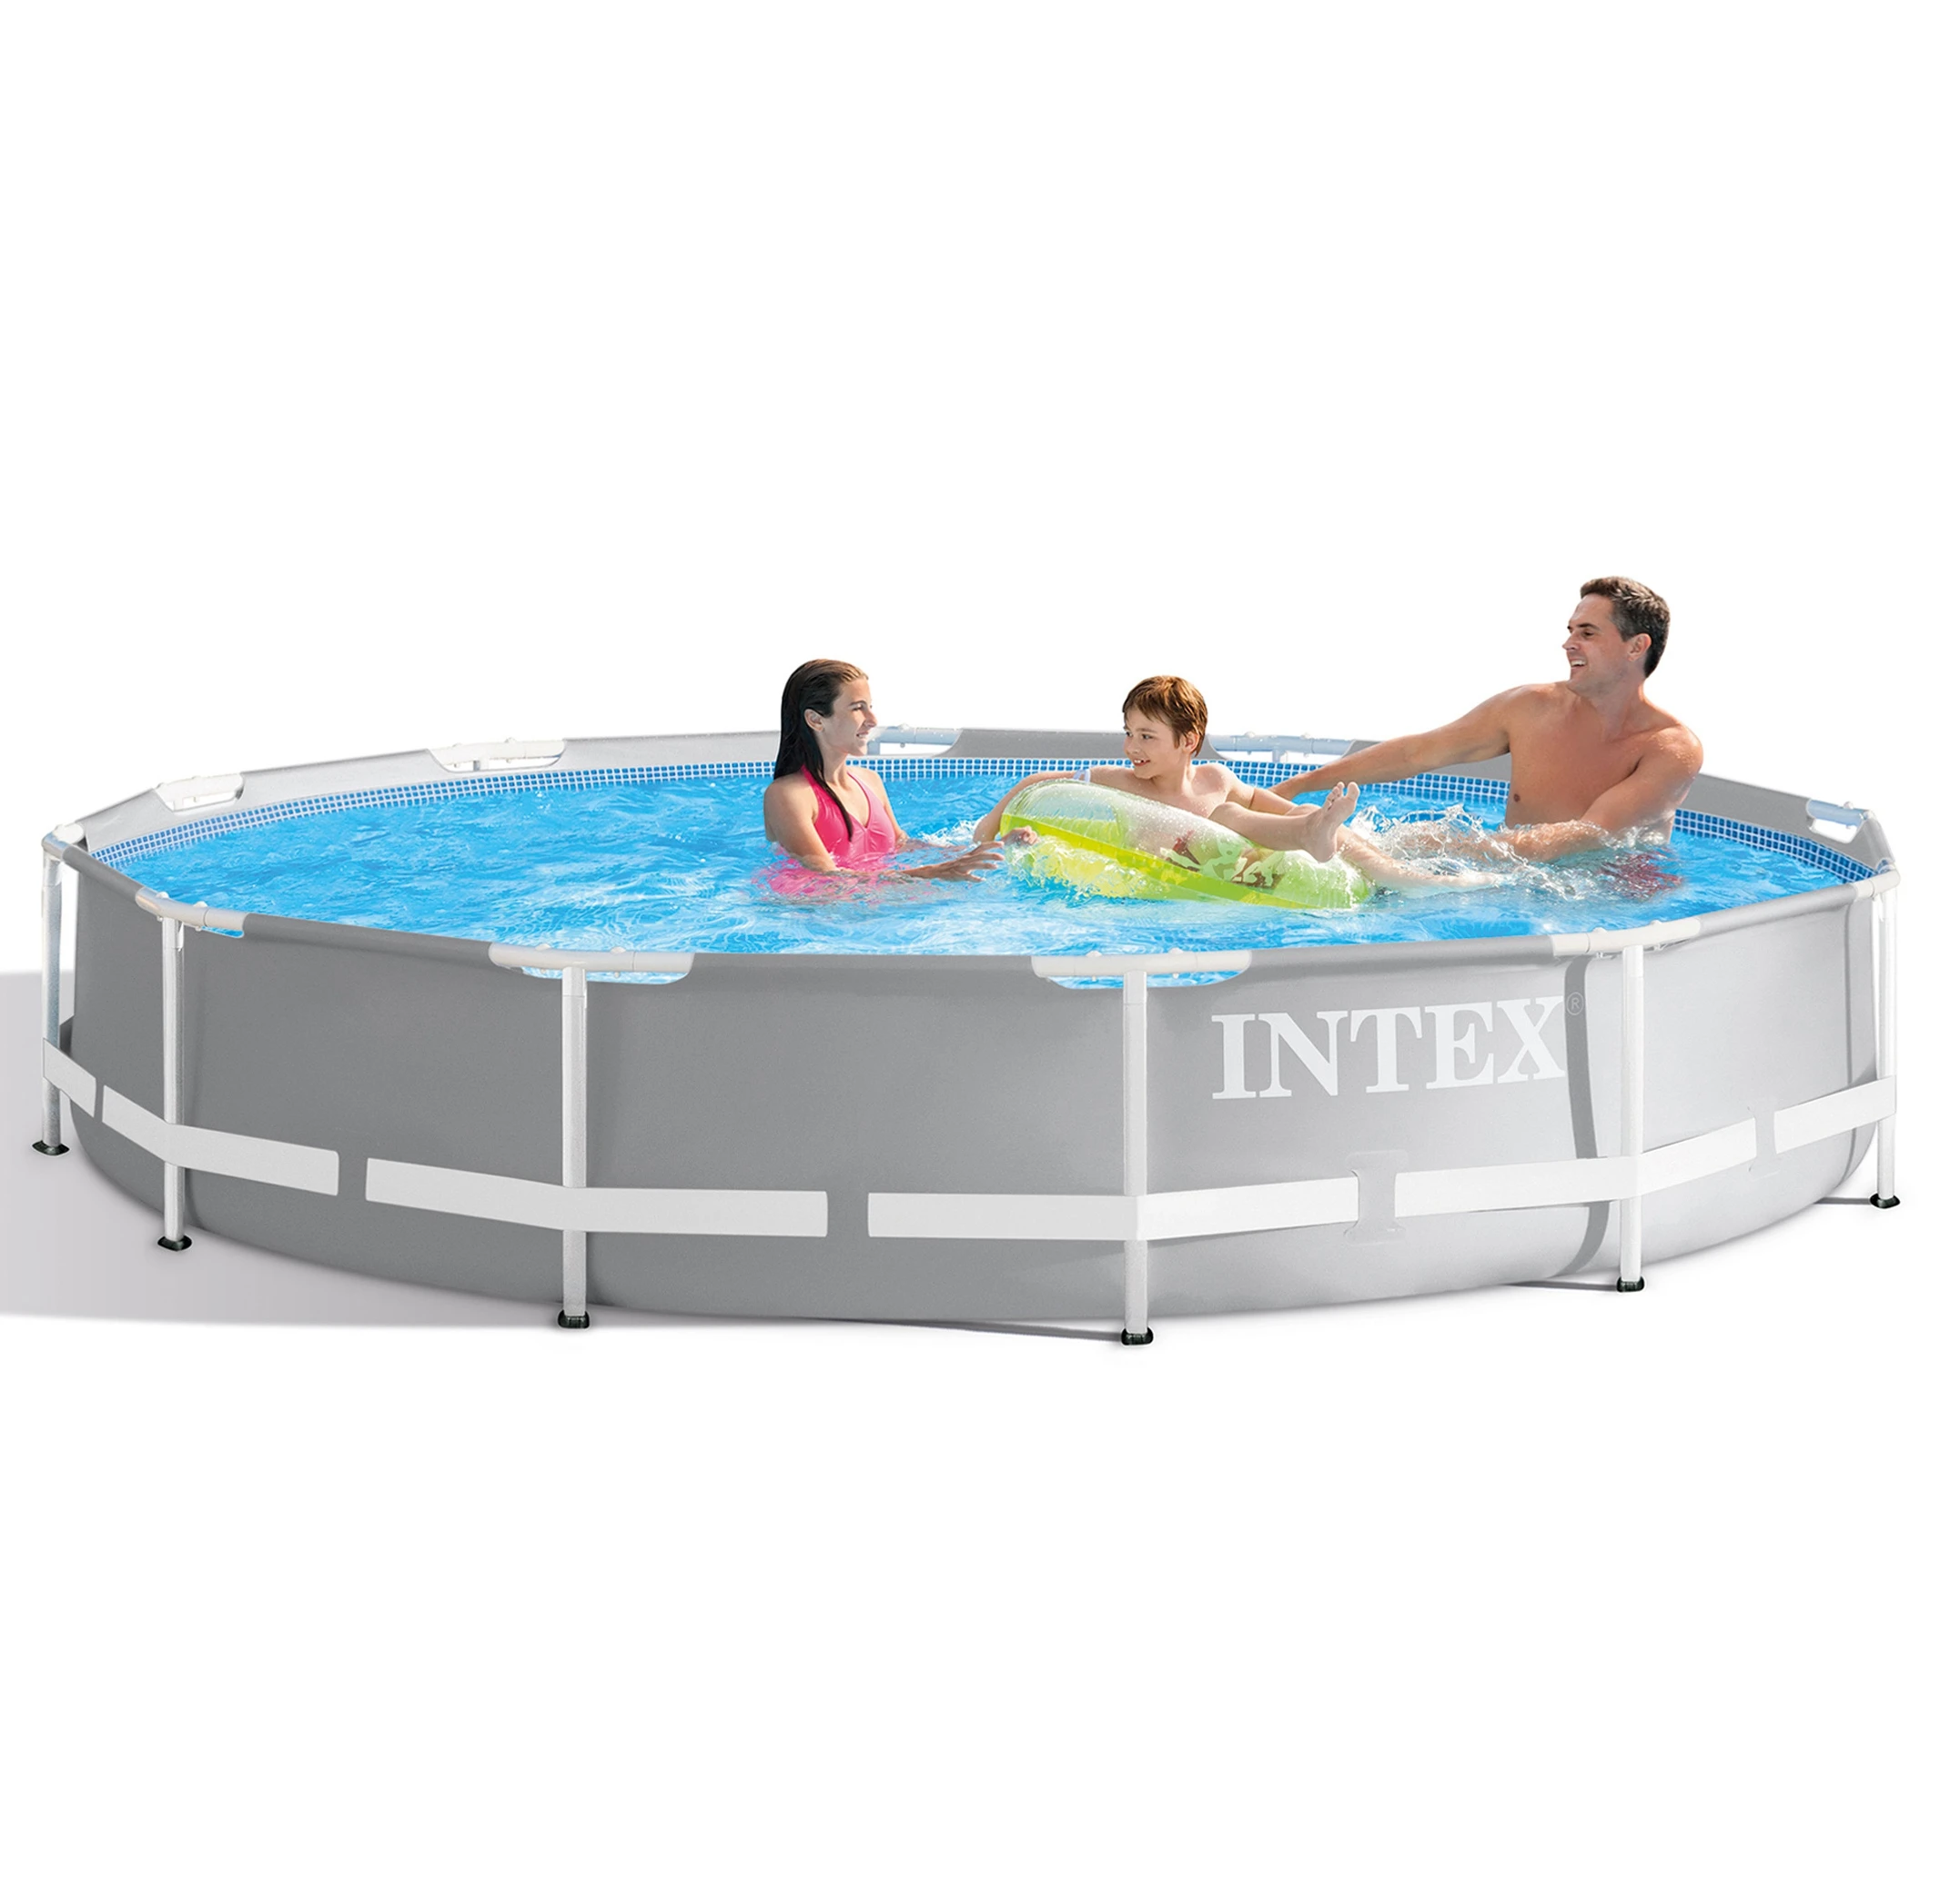 

INTEX 26712 Metal Frame Pool large inflatable outdoor Family swimming pool, N/a